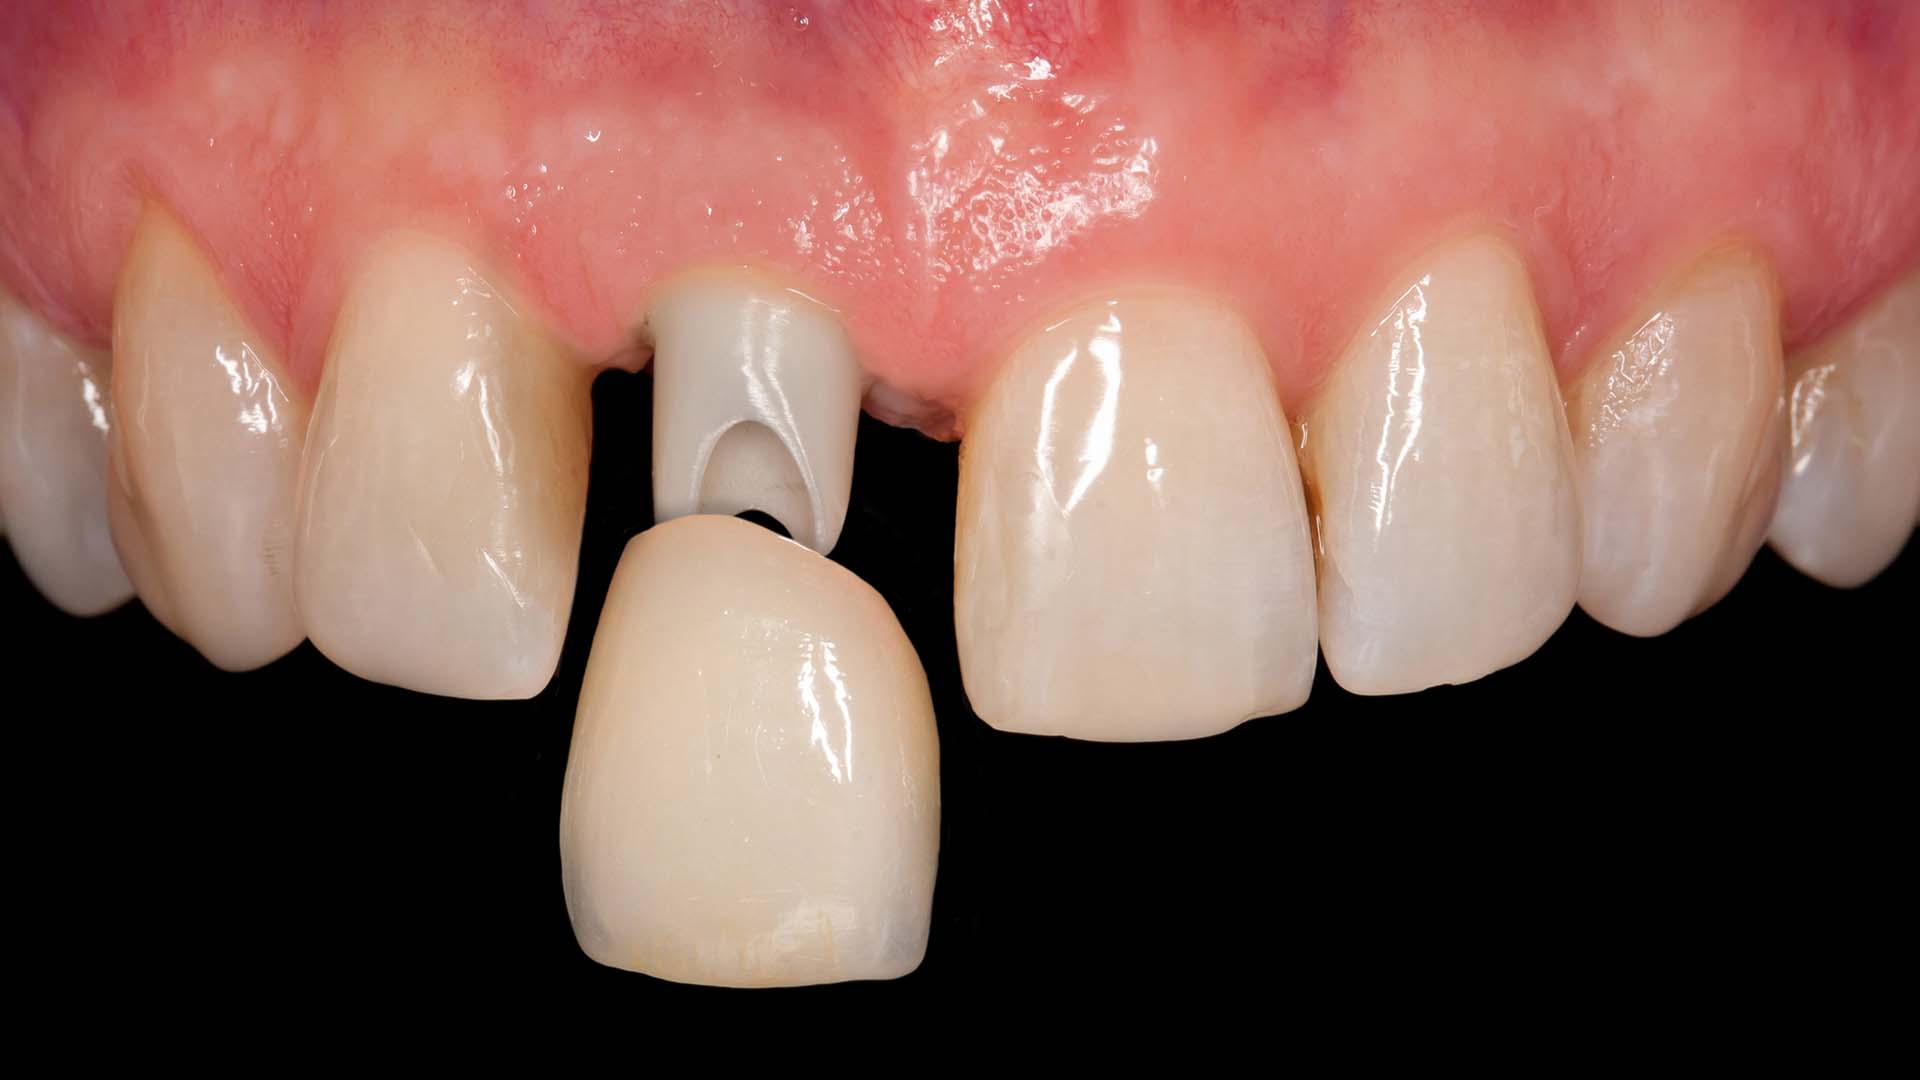 Image of a frontal tooth crown. Ivy Lane Dentistry offers emergency dental support for lost crowns in San Antonio, TX